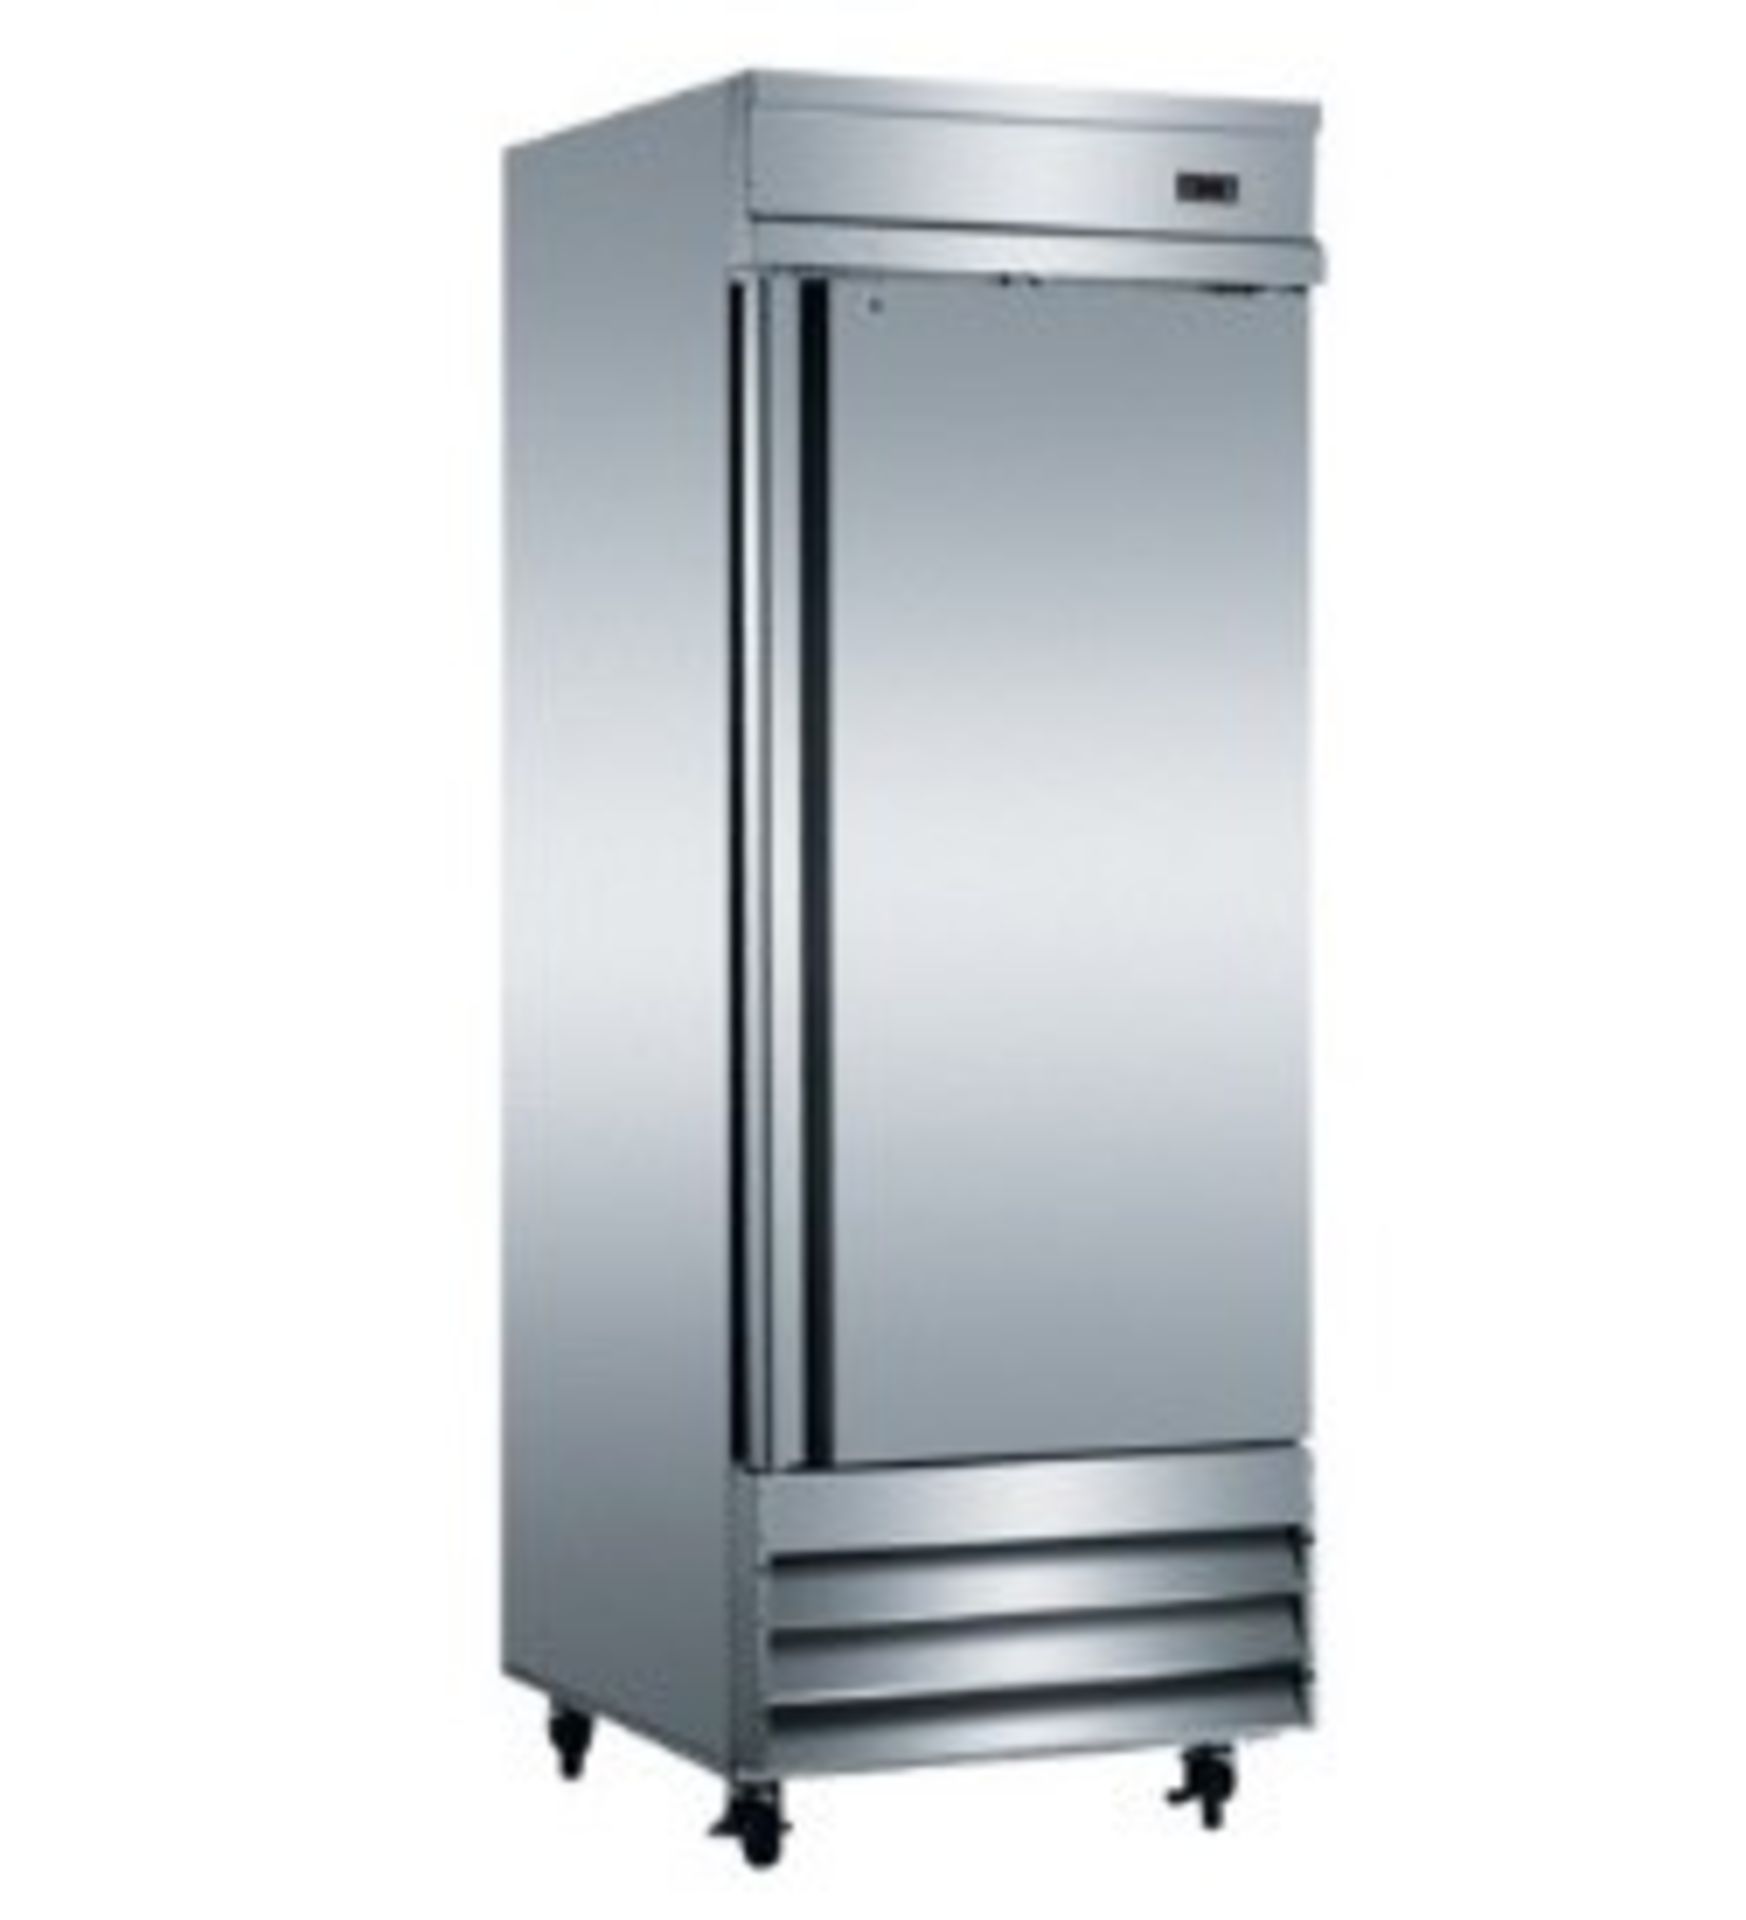 EQ Stainless Steel Reach-In Freezer 172 Gal, Silver Model #:CFD-1FF EHC L*W*H (inch):29*32.25*82.5